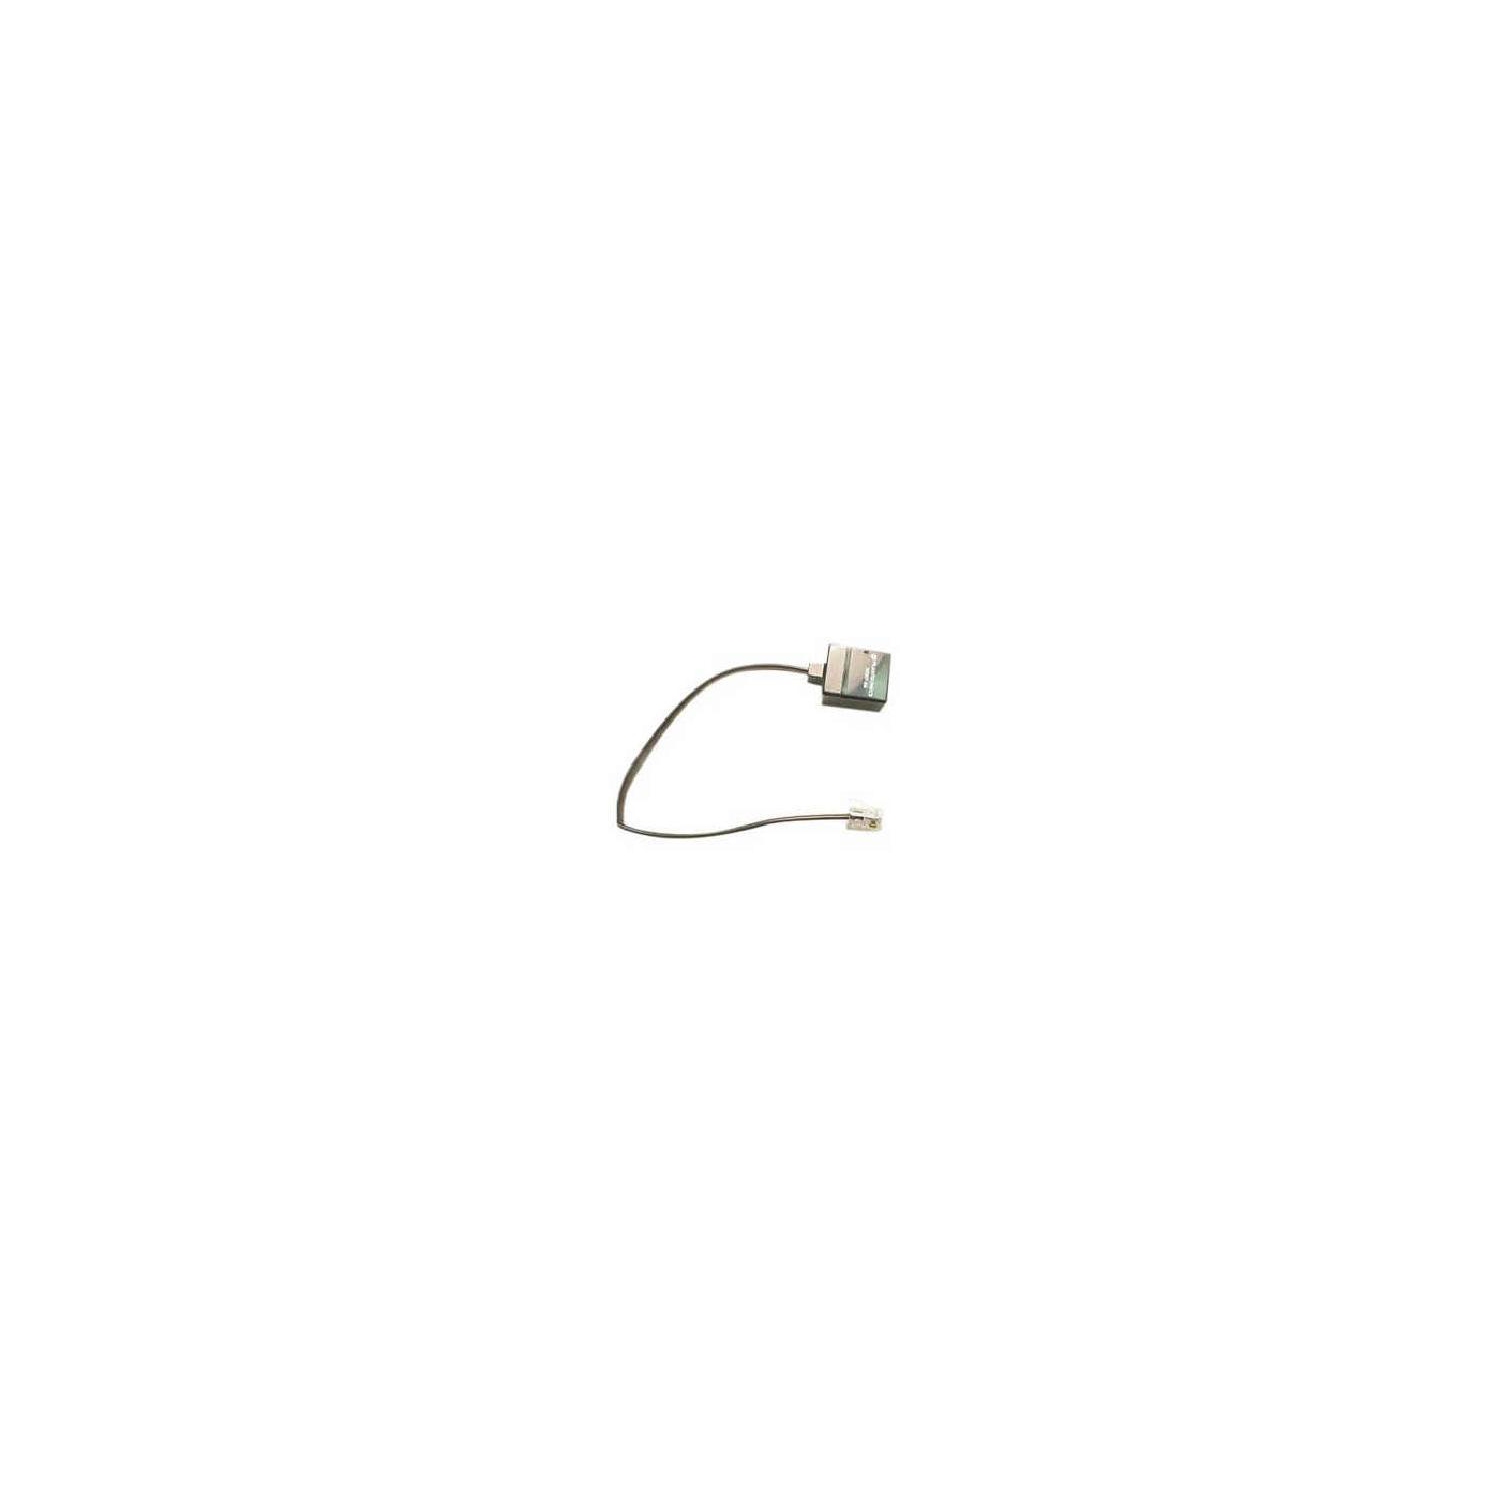 Plantronics Headset Extension Cable Adapter - (85638-01)